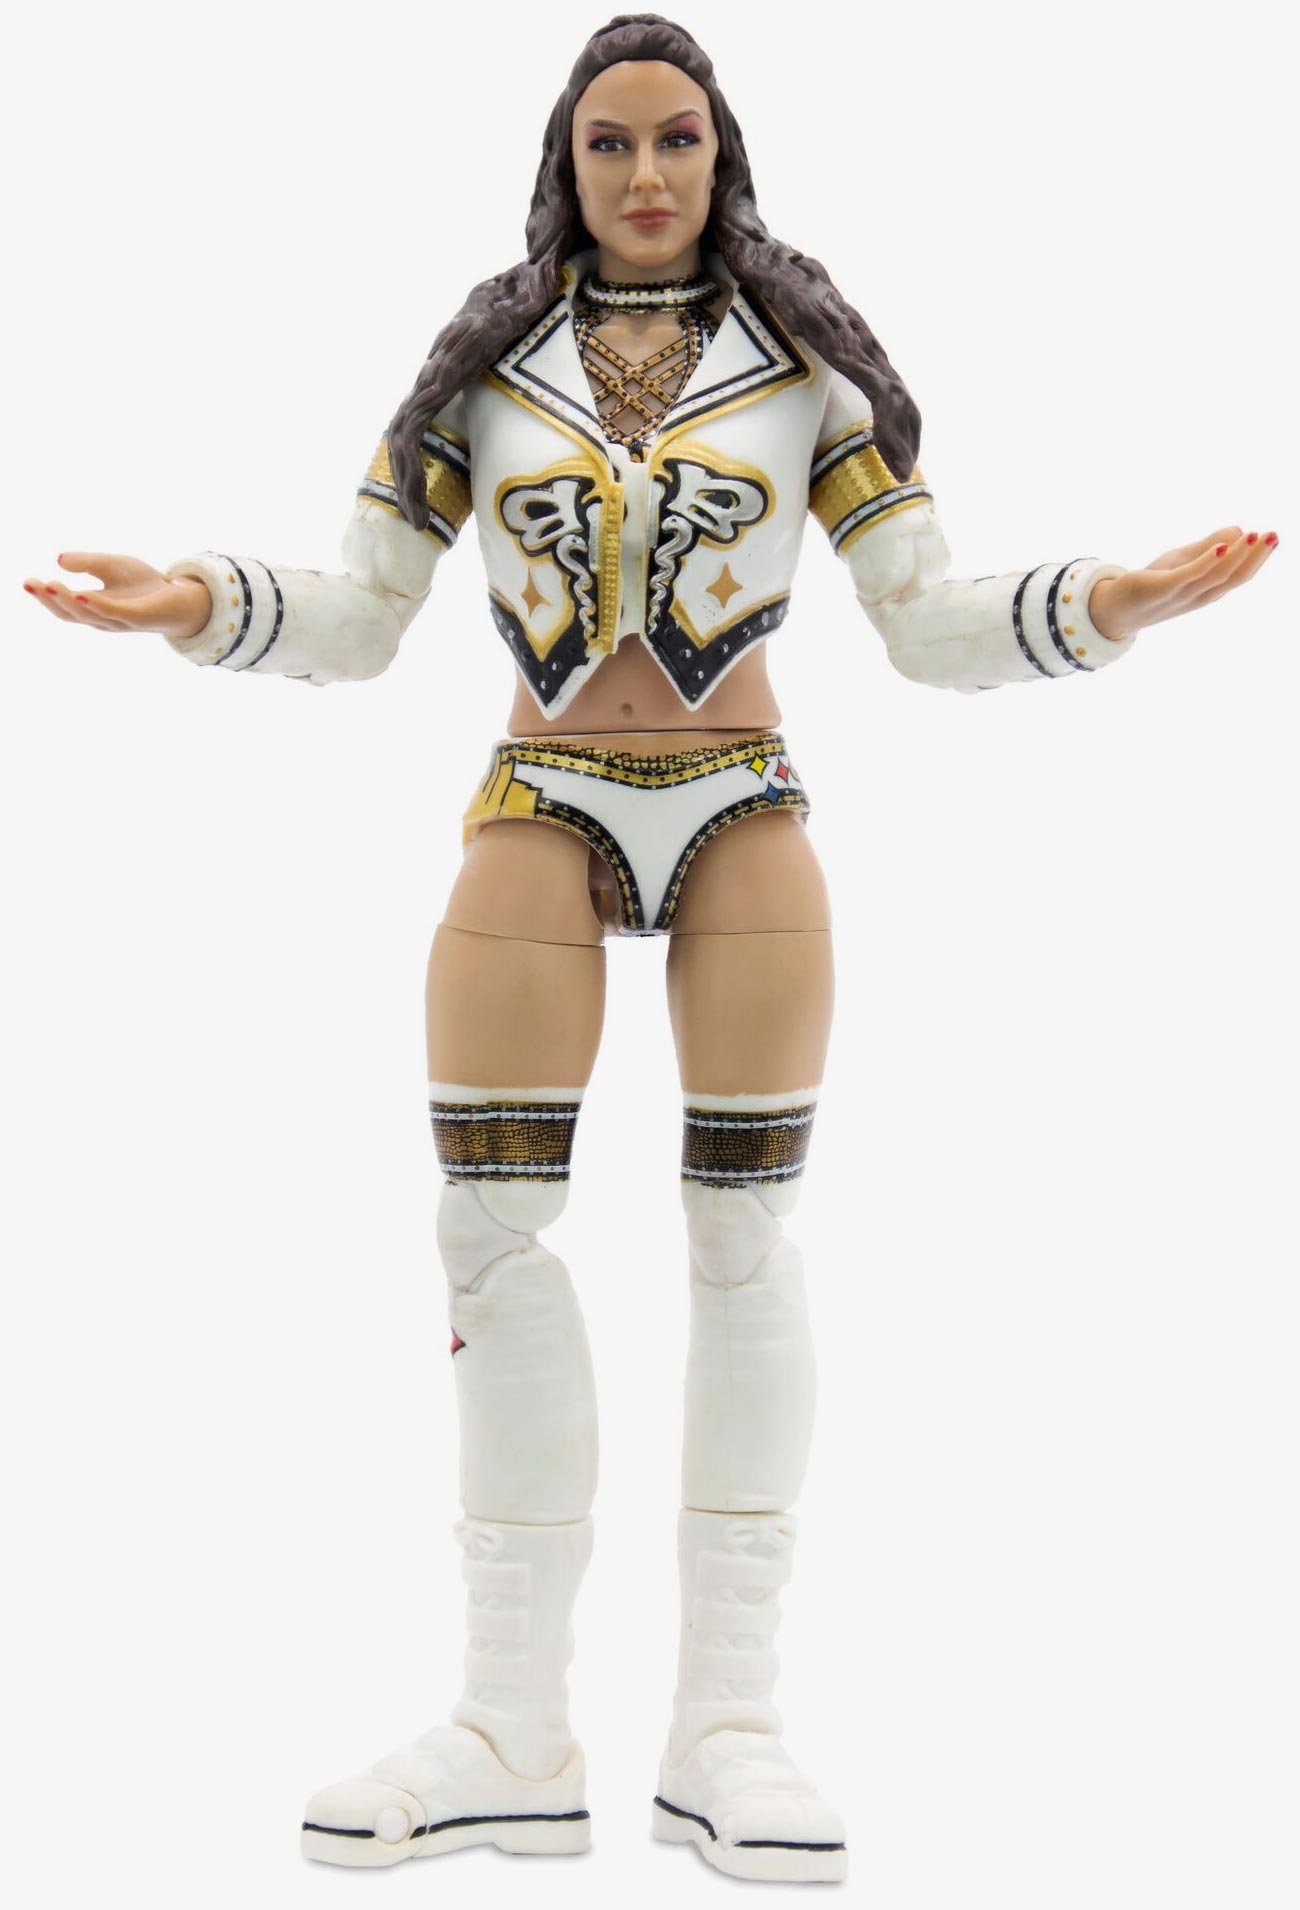 Dr Britt Baker - AEW Unrivaled Supreme Collection Series #1